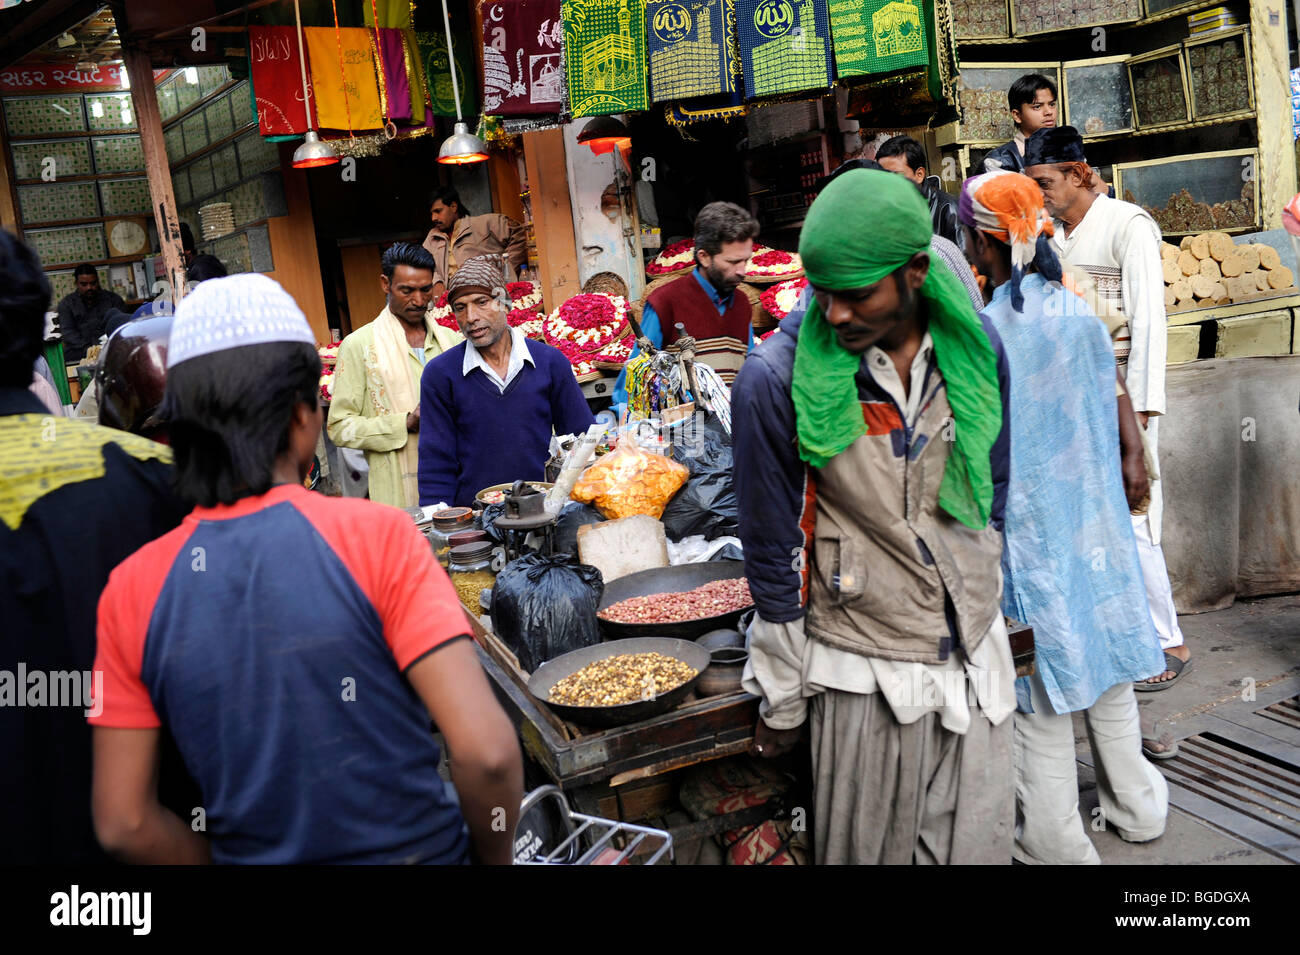 Street scene in the historic town centre of Ajmer, Rajasthan, North India, India, South Asia, Asia Stock Photo